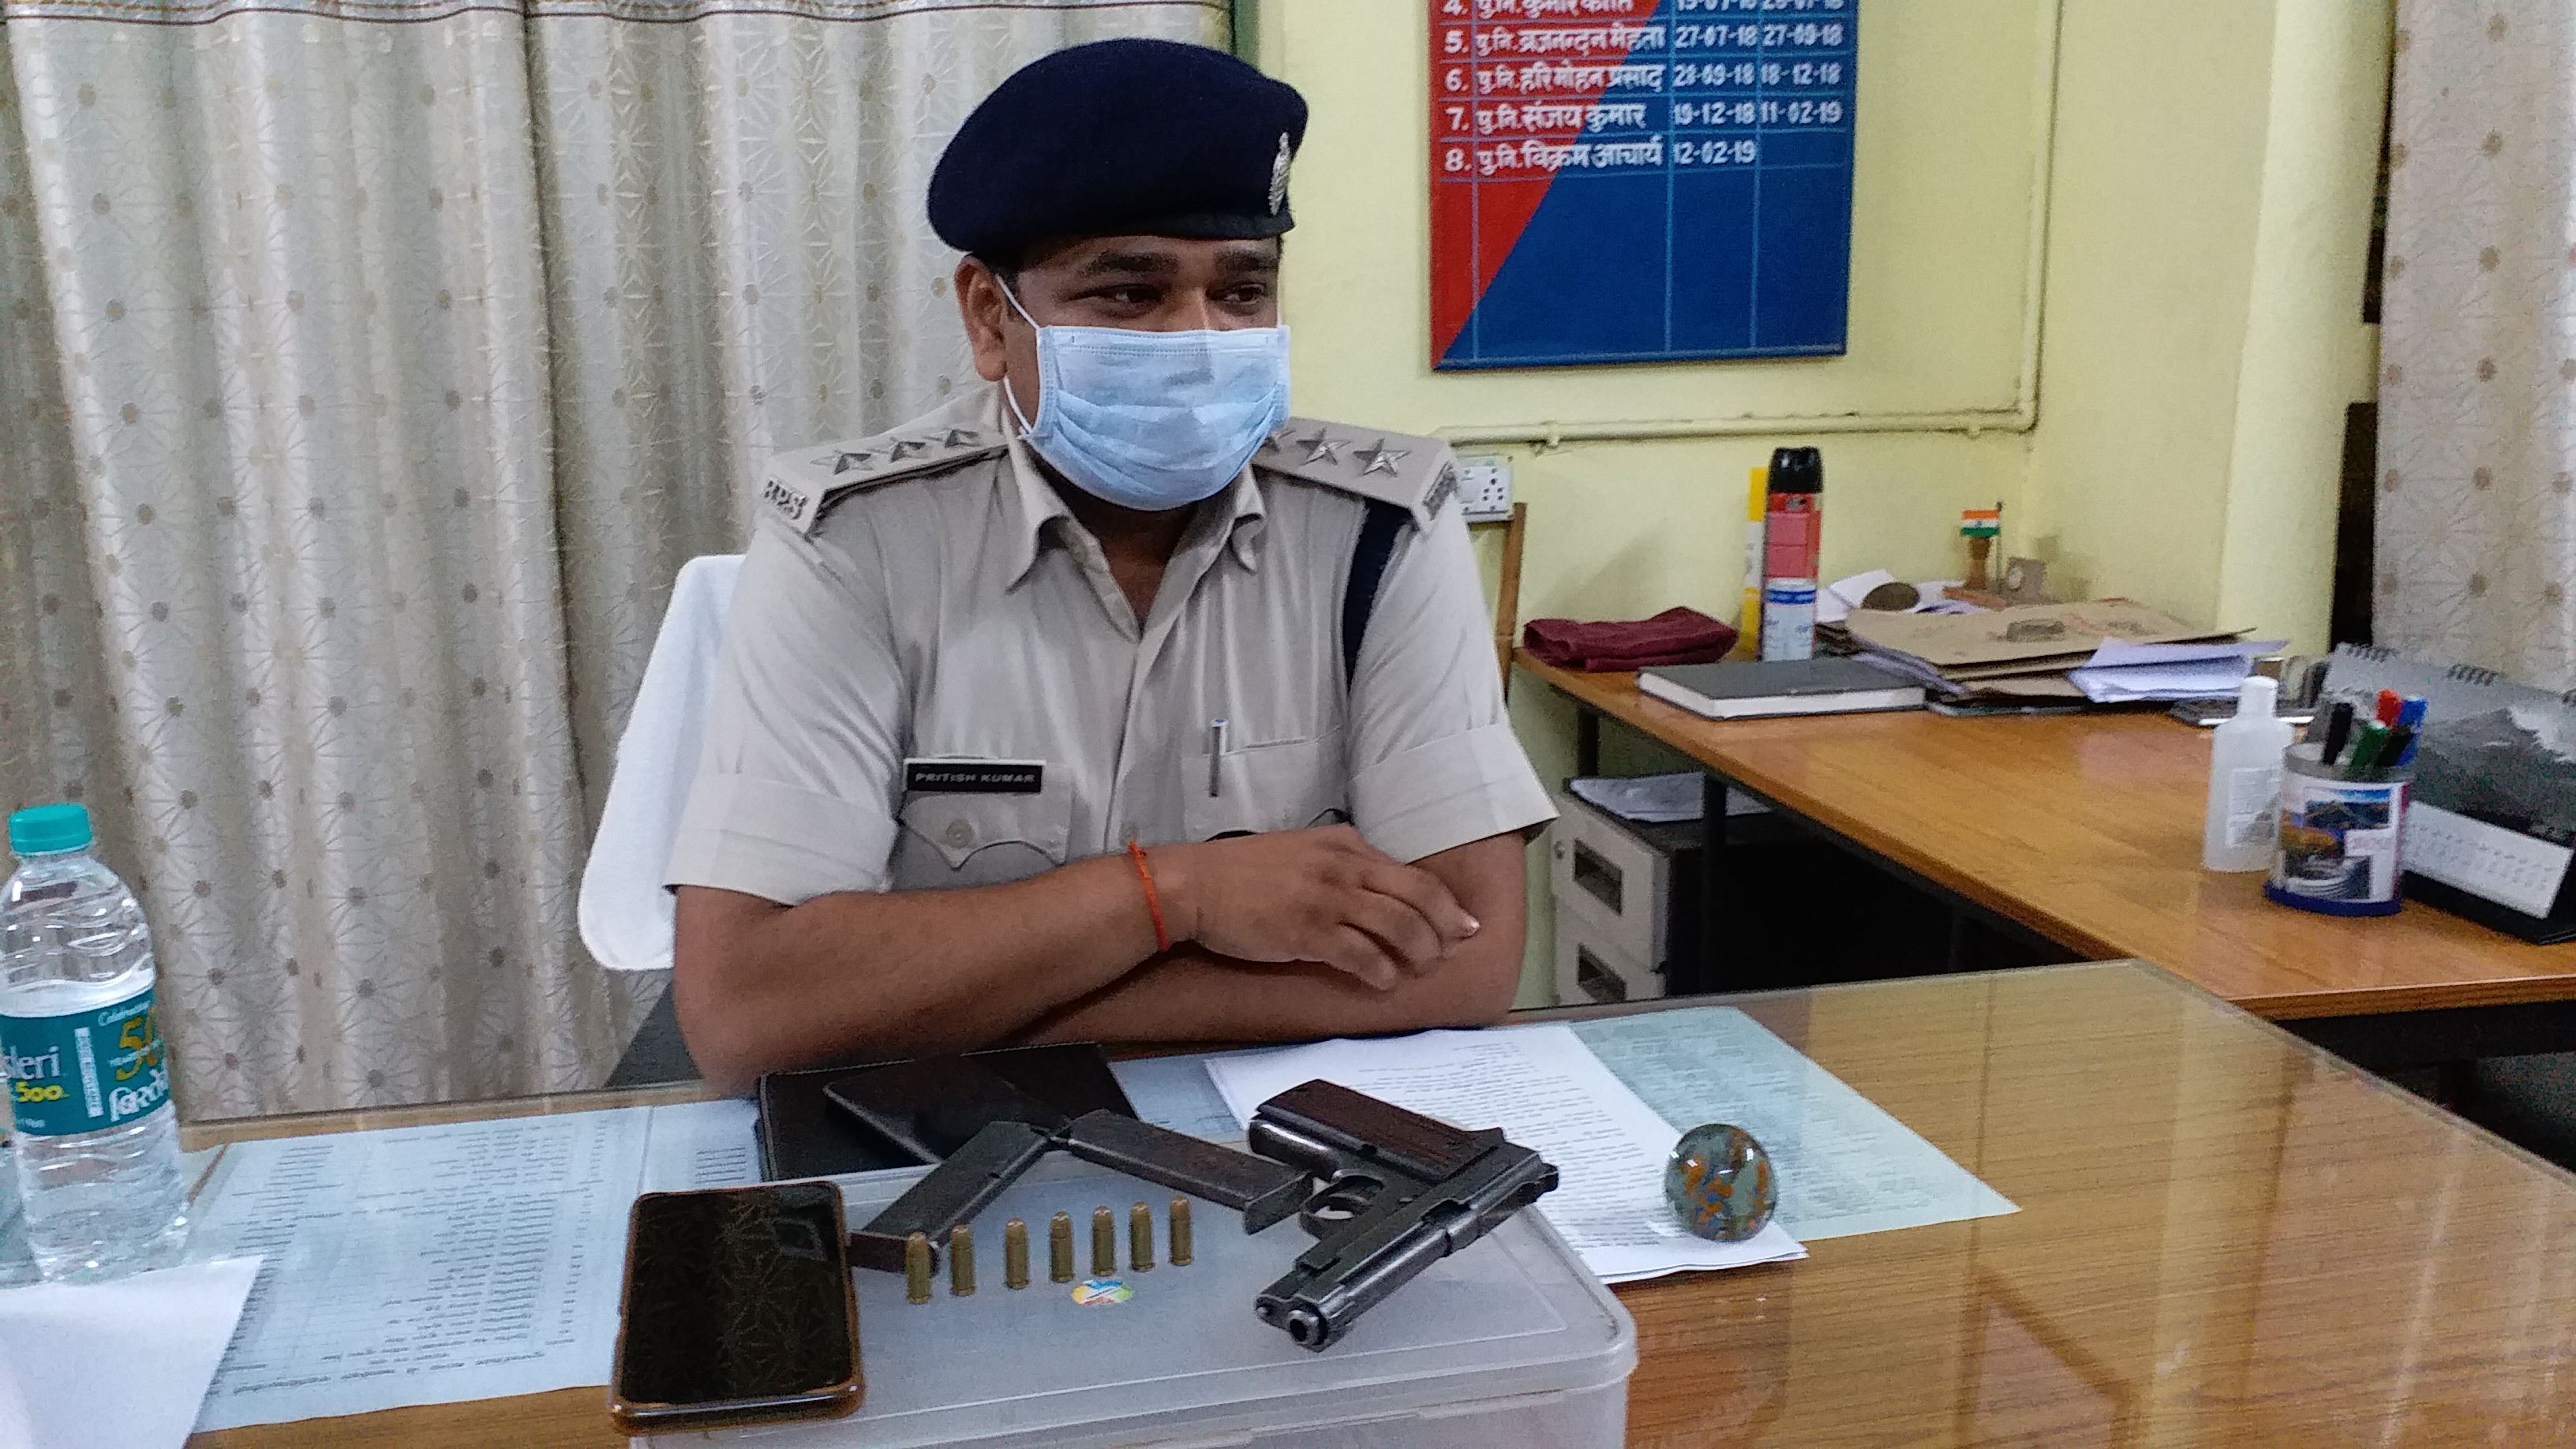 Samastipur police exposed bank robbery cases